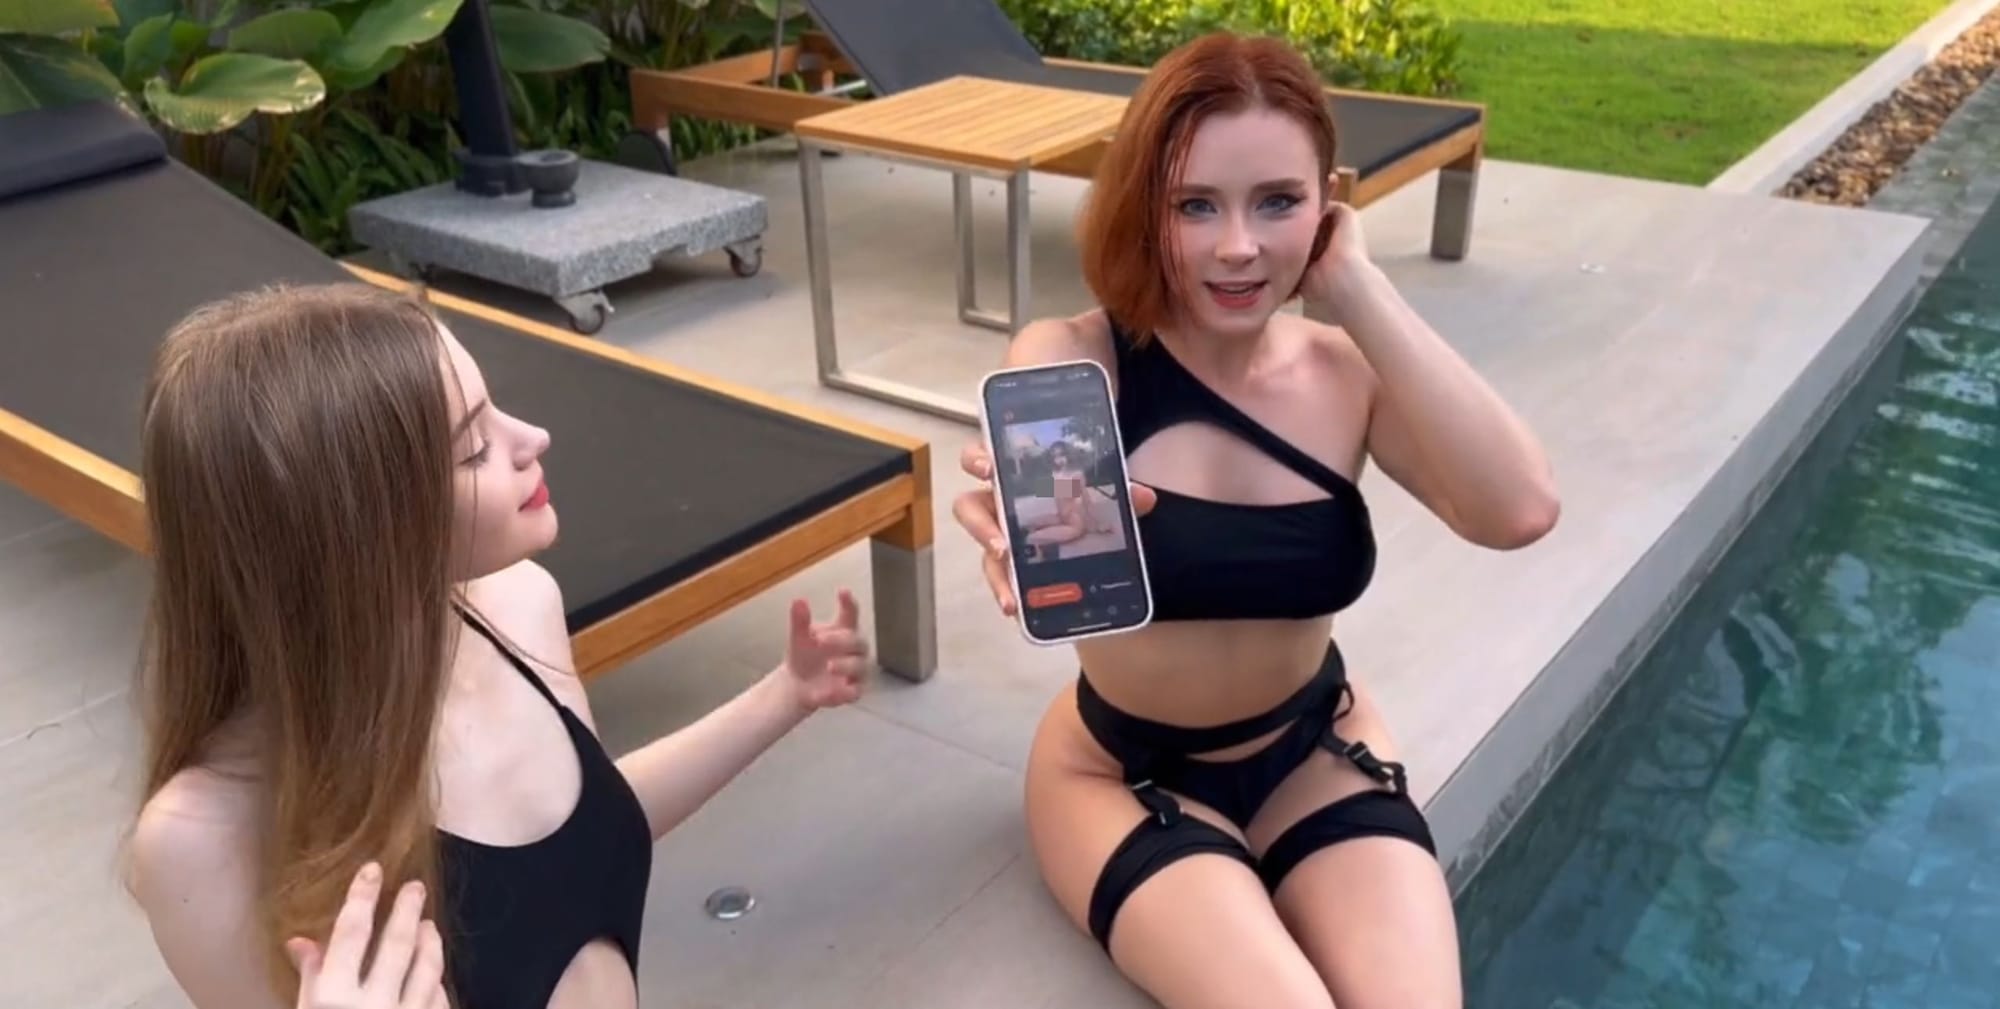 Pornhub's Biggest Star Is Promoting an AI Nonconsensual 'Nudify' App